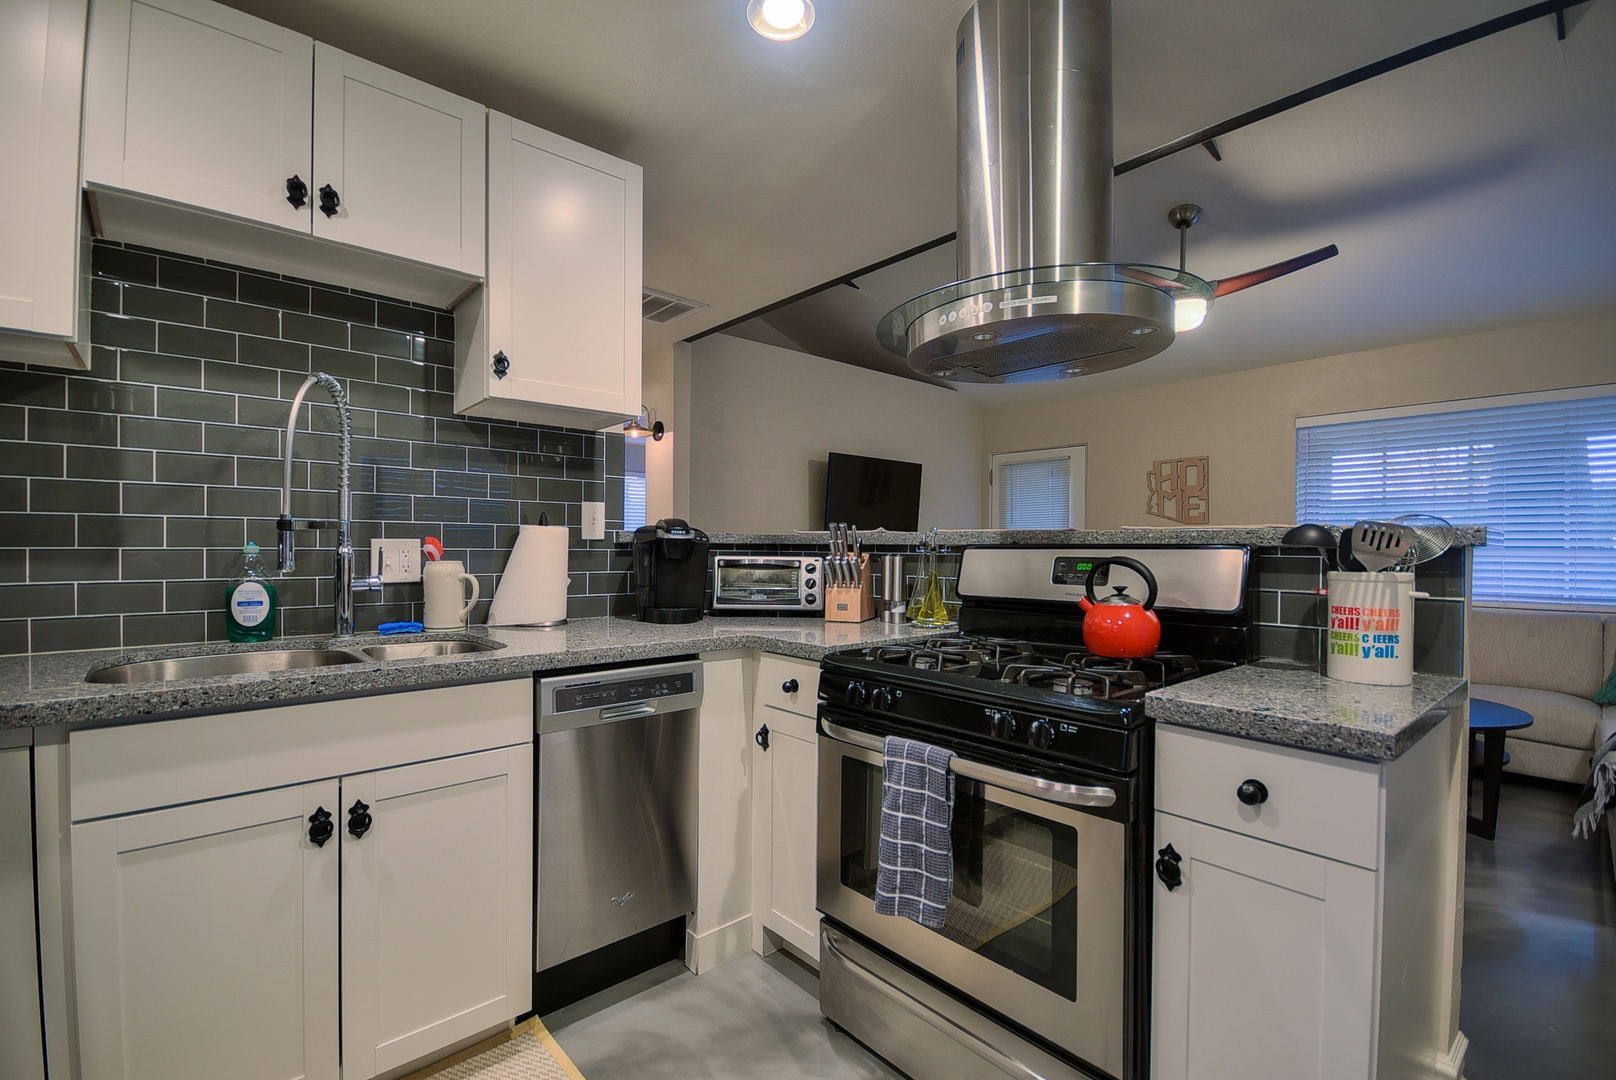 Modern stainless steel appliances including: dishwasher, refrigerator, stove top, microwave, toaster, K-cup coffee machine, kettle, pots and pans, and utensils for at least 8 guests.